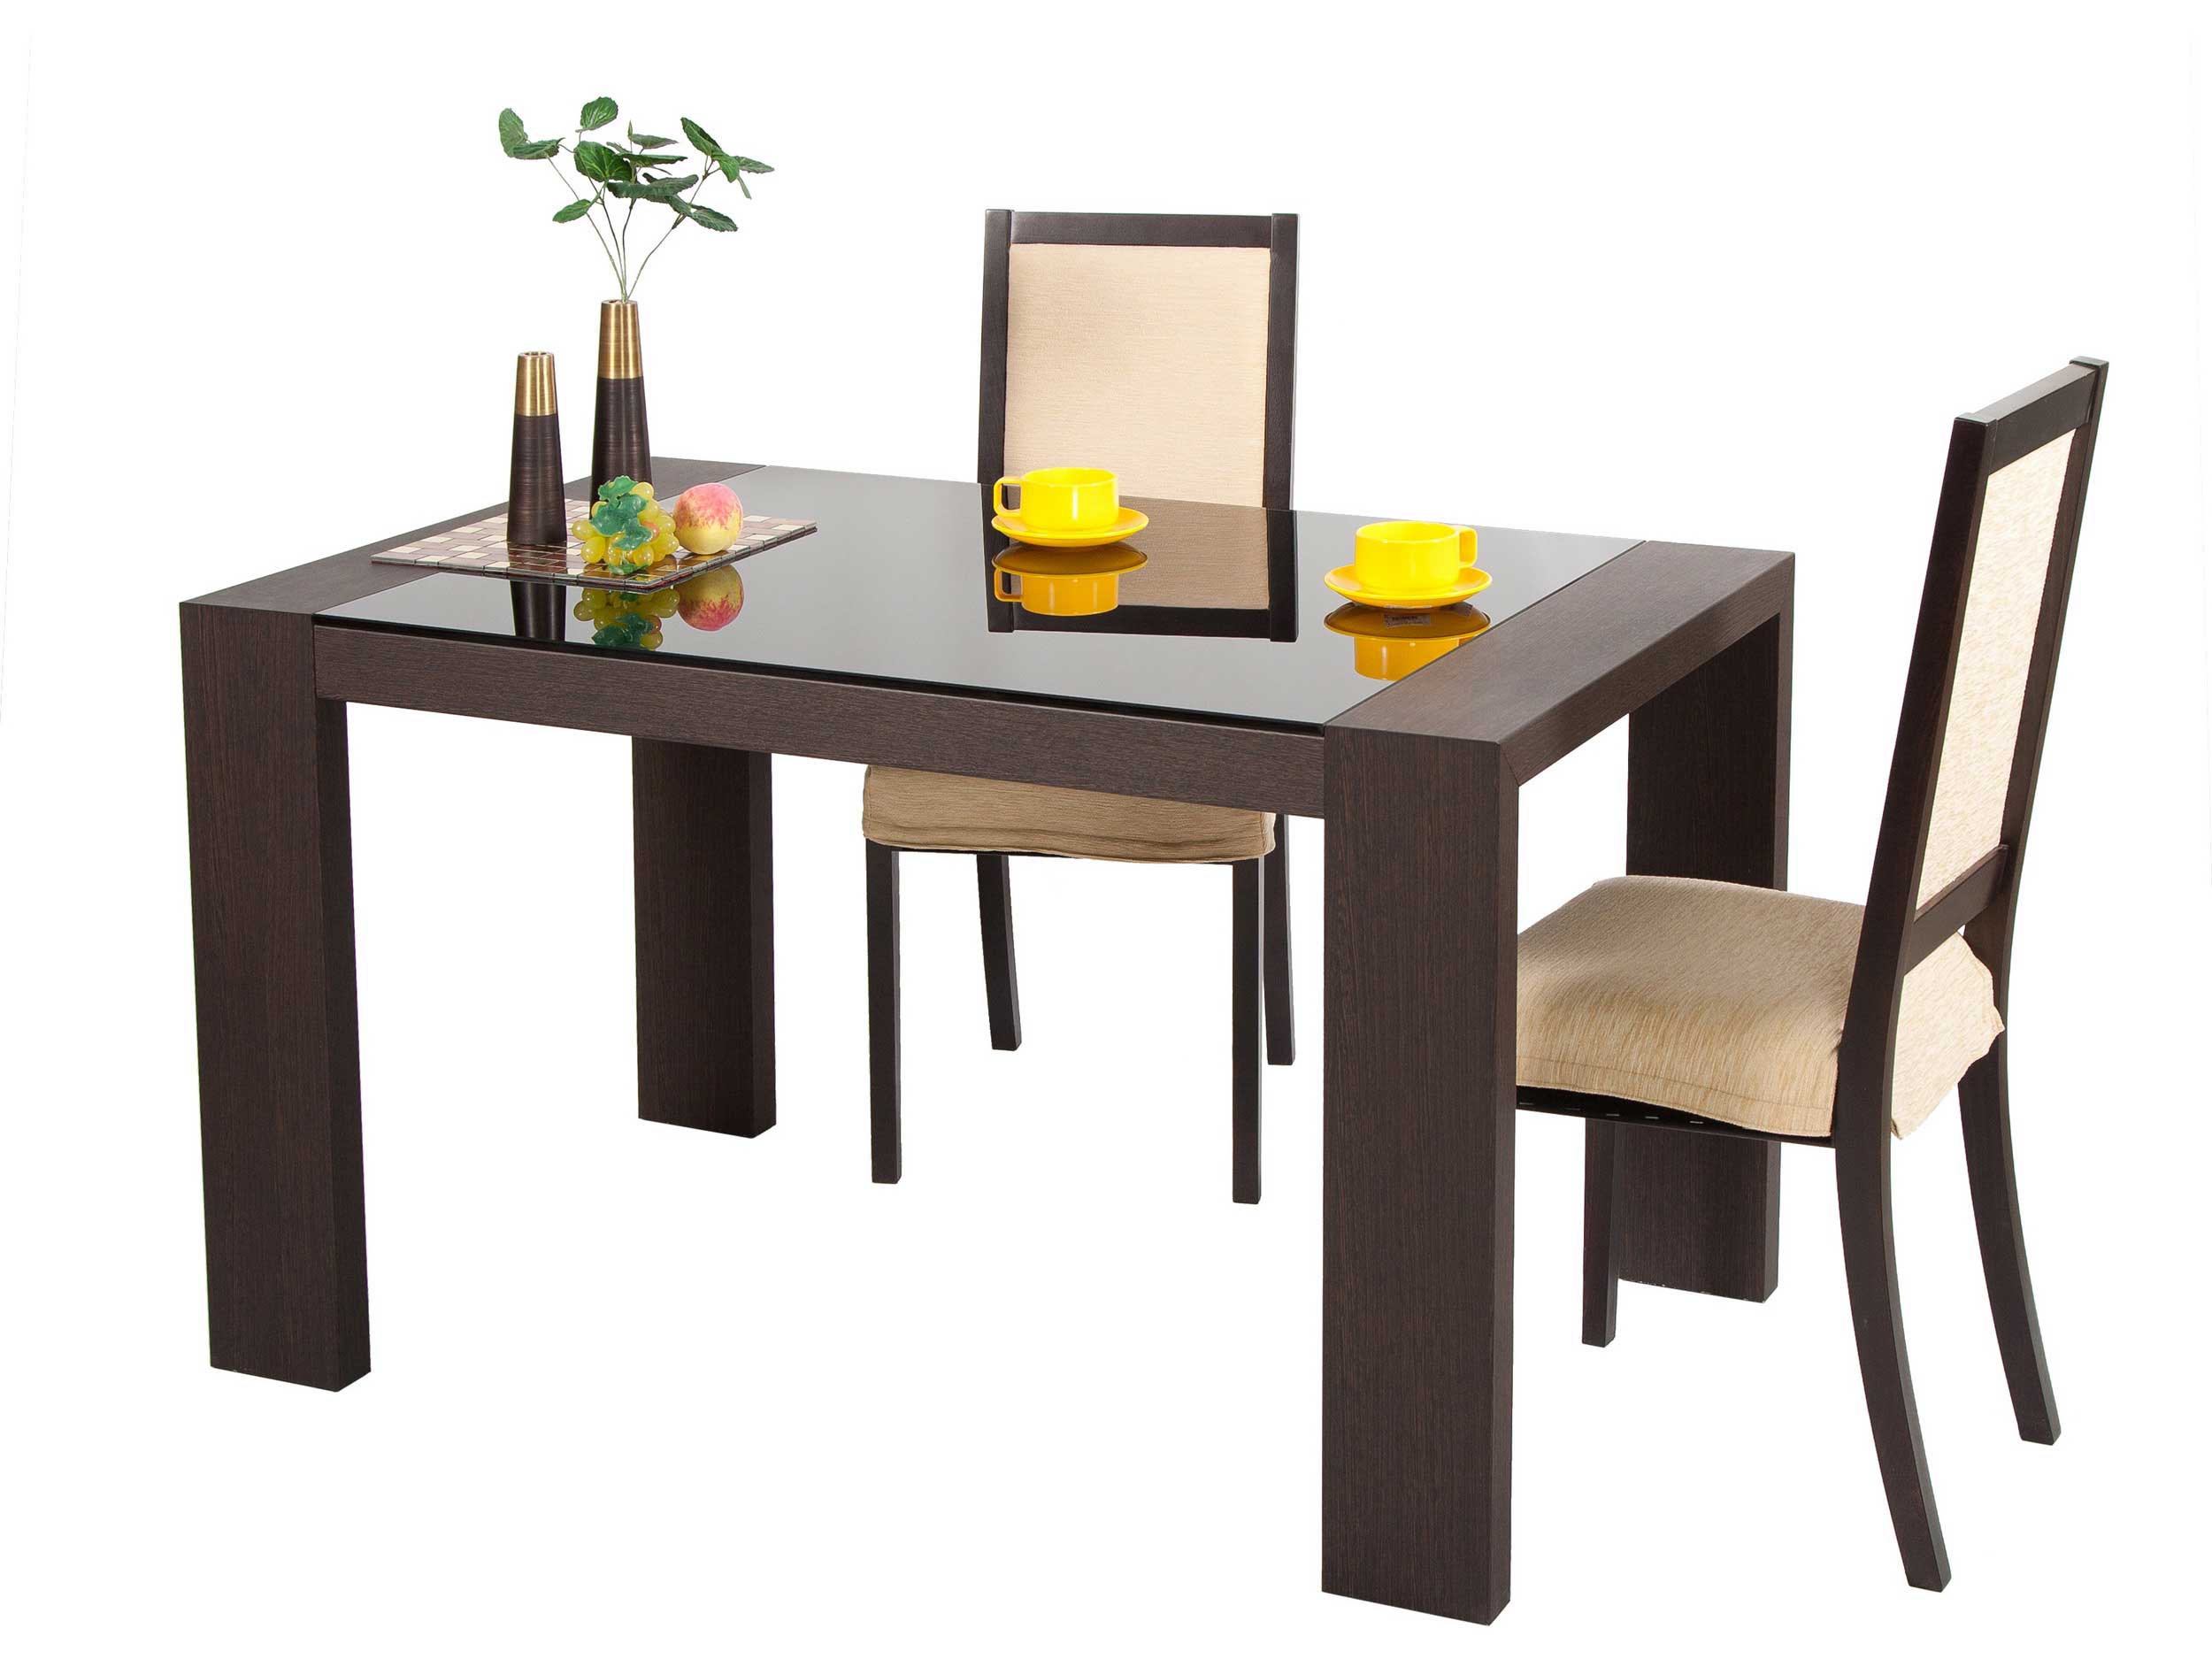 How to choose a dining table in the living room: useful tips, styles and recommendations